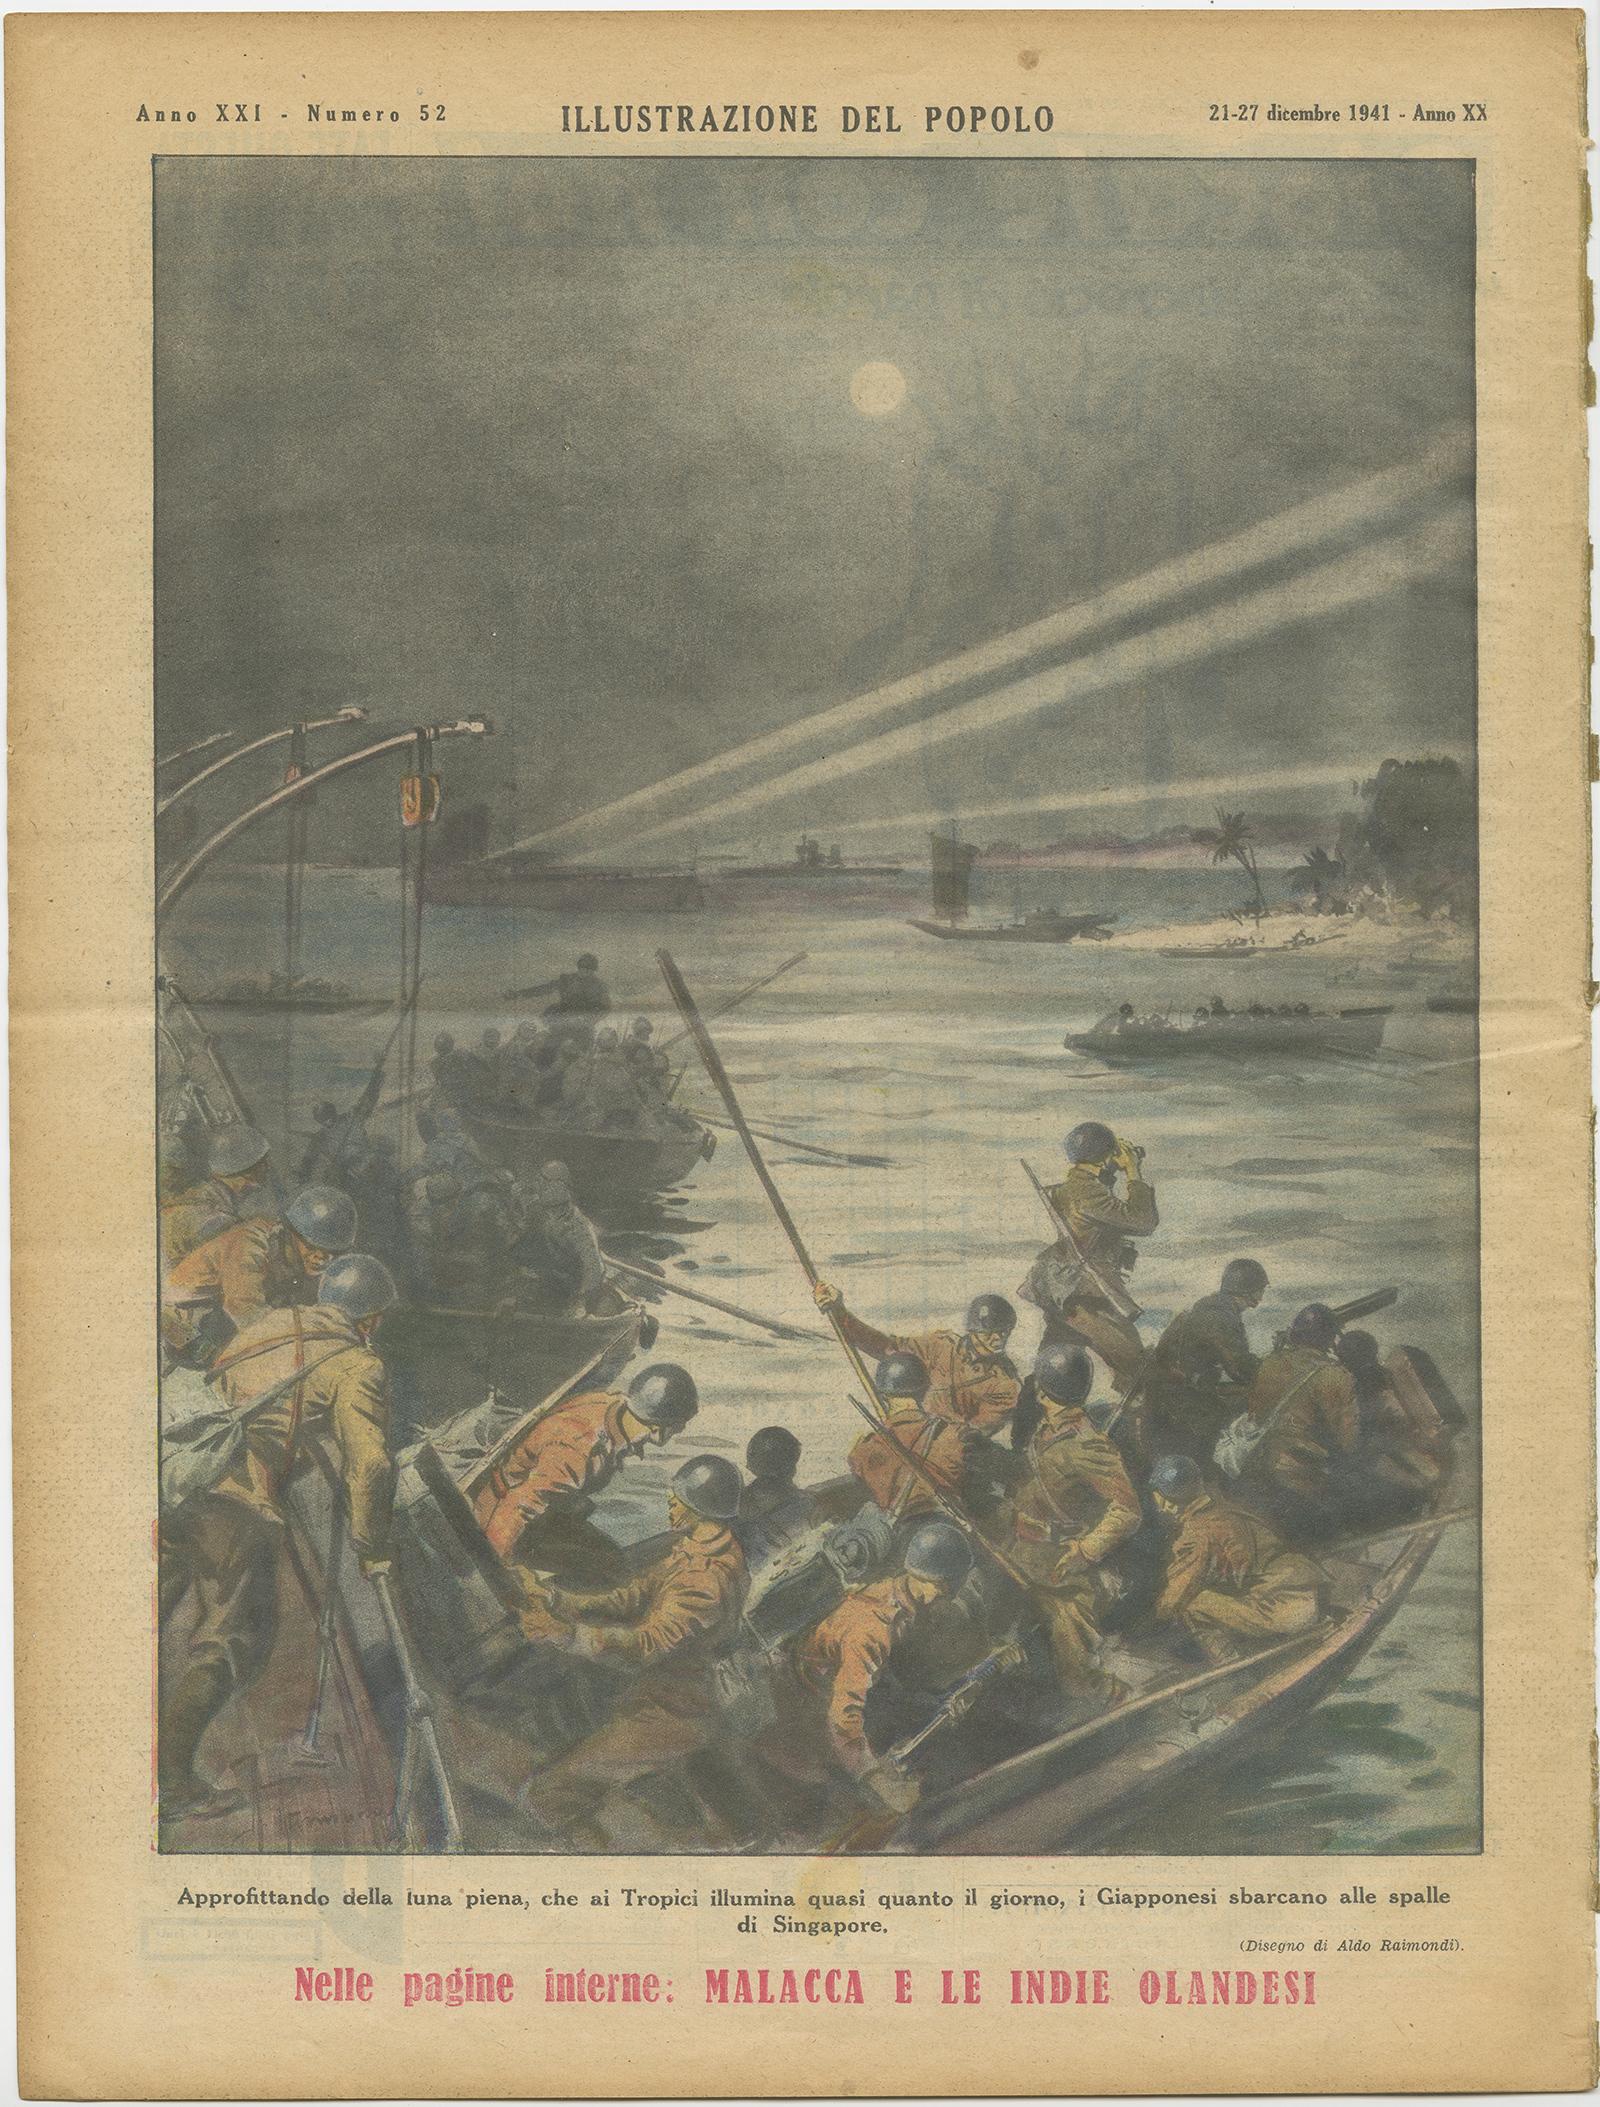 Illustrations of 'Illustrazione del Popolo', a supplement of 'Gazzetta del Popolo', an Italian newspaper. The first image shows the Japanese kamikaze torpedoes attack the British fleet near the coast of the Malacca peninsula. The other image shows a